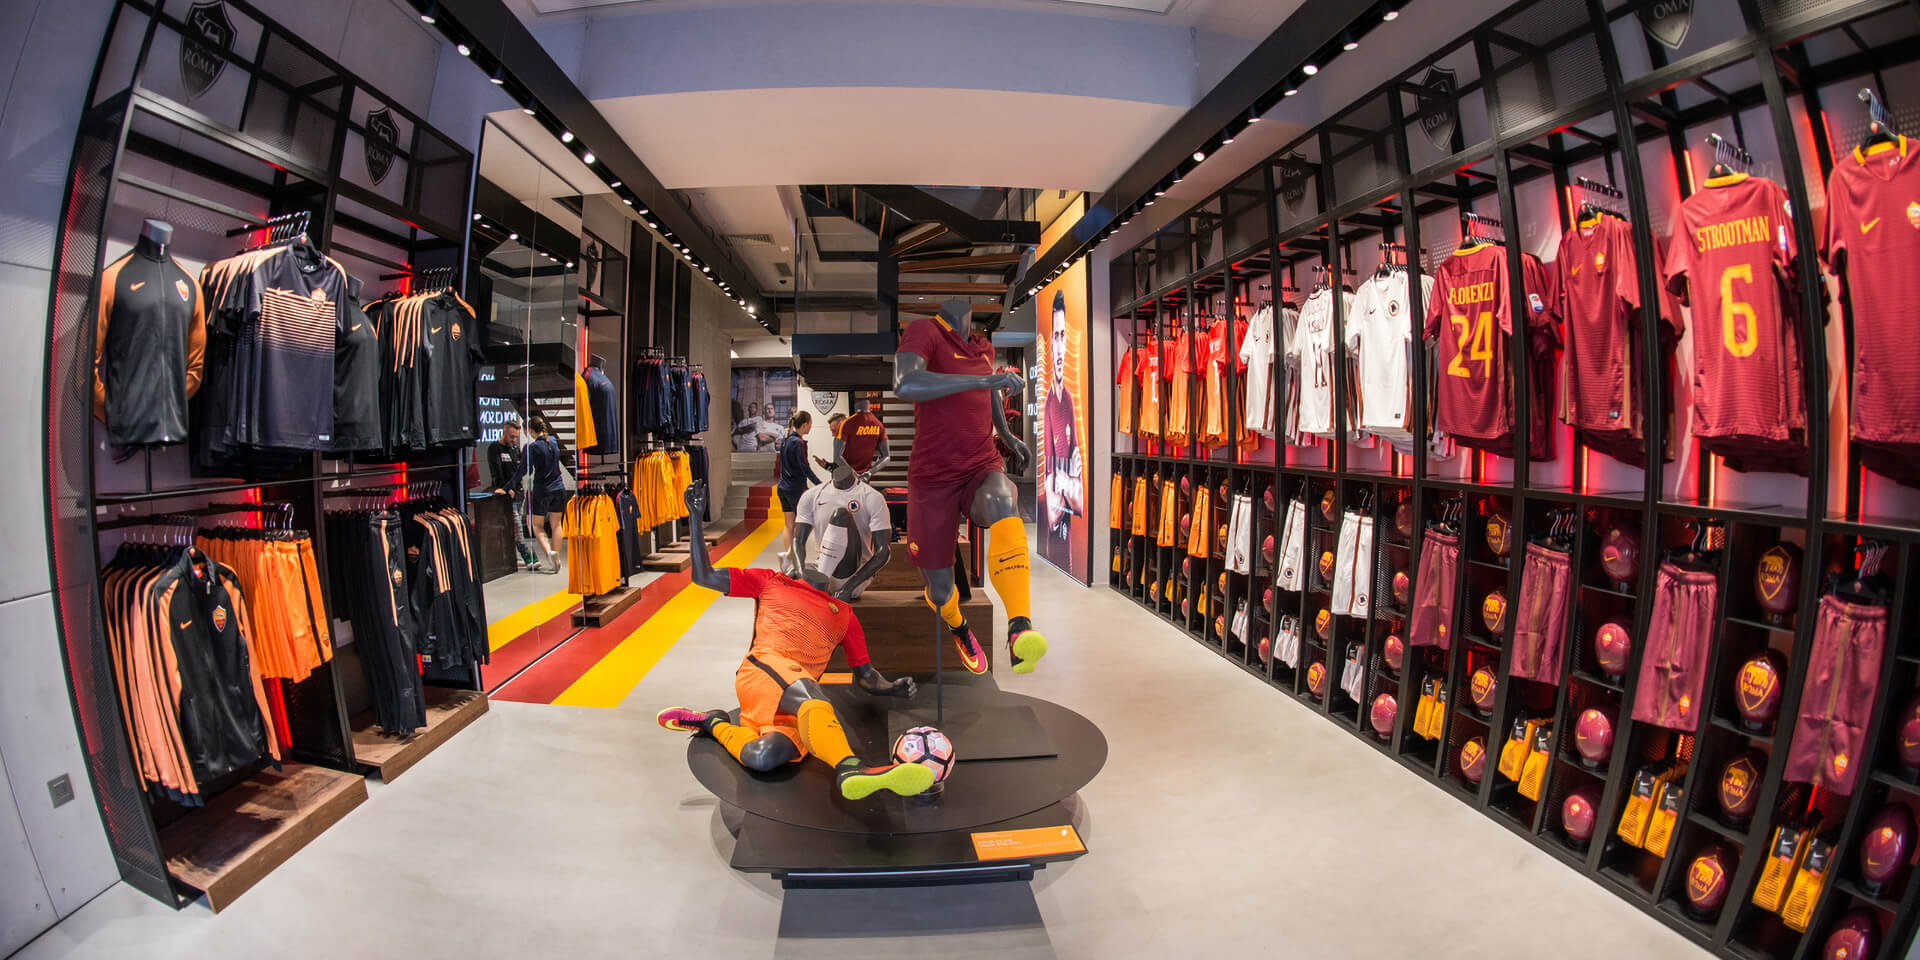 A.S. Roma chose LS Retail software solution